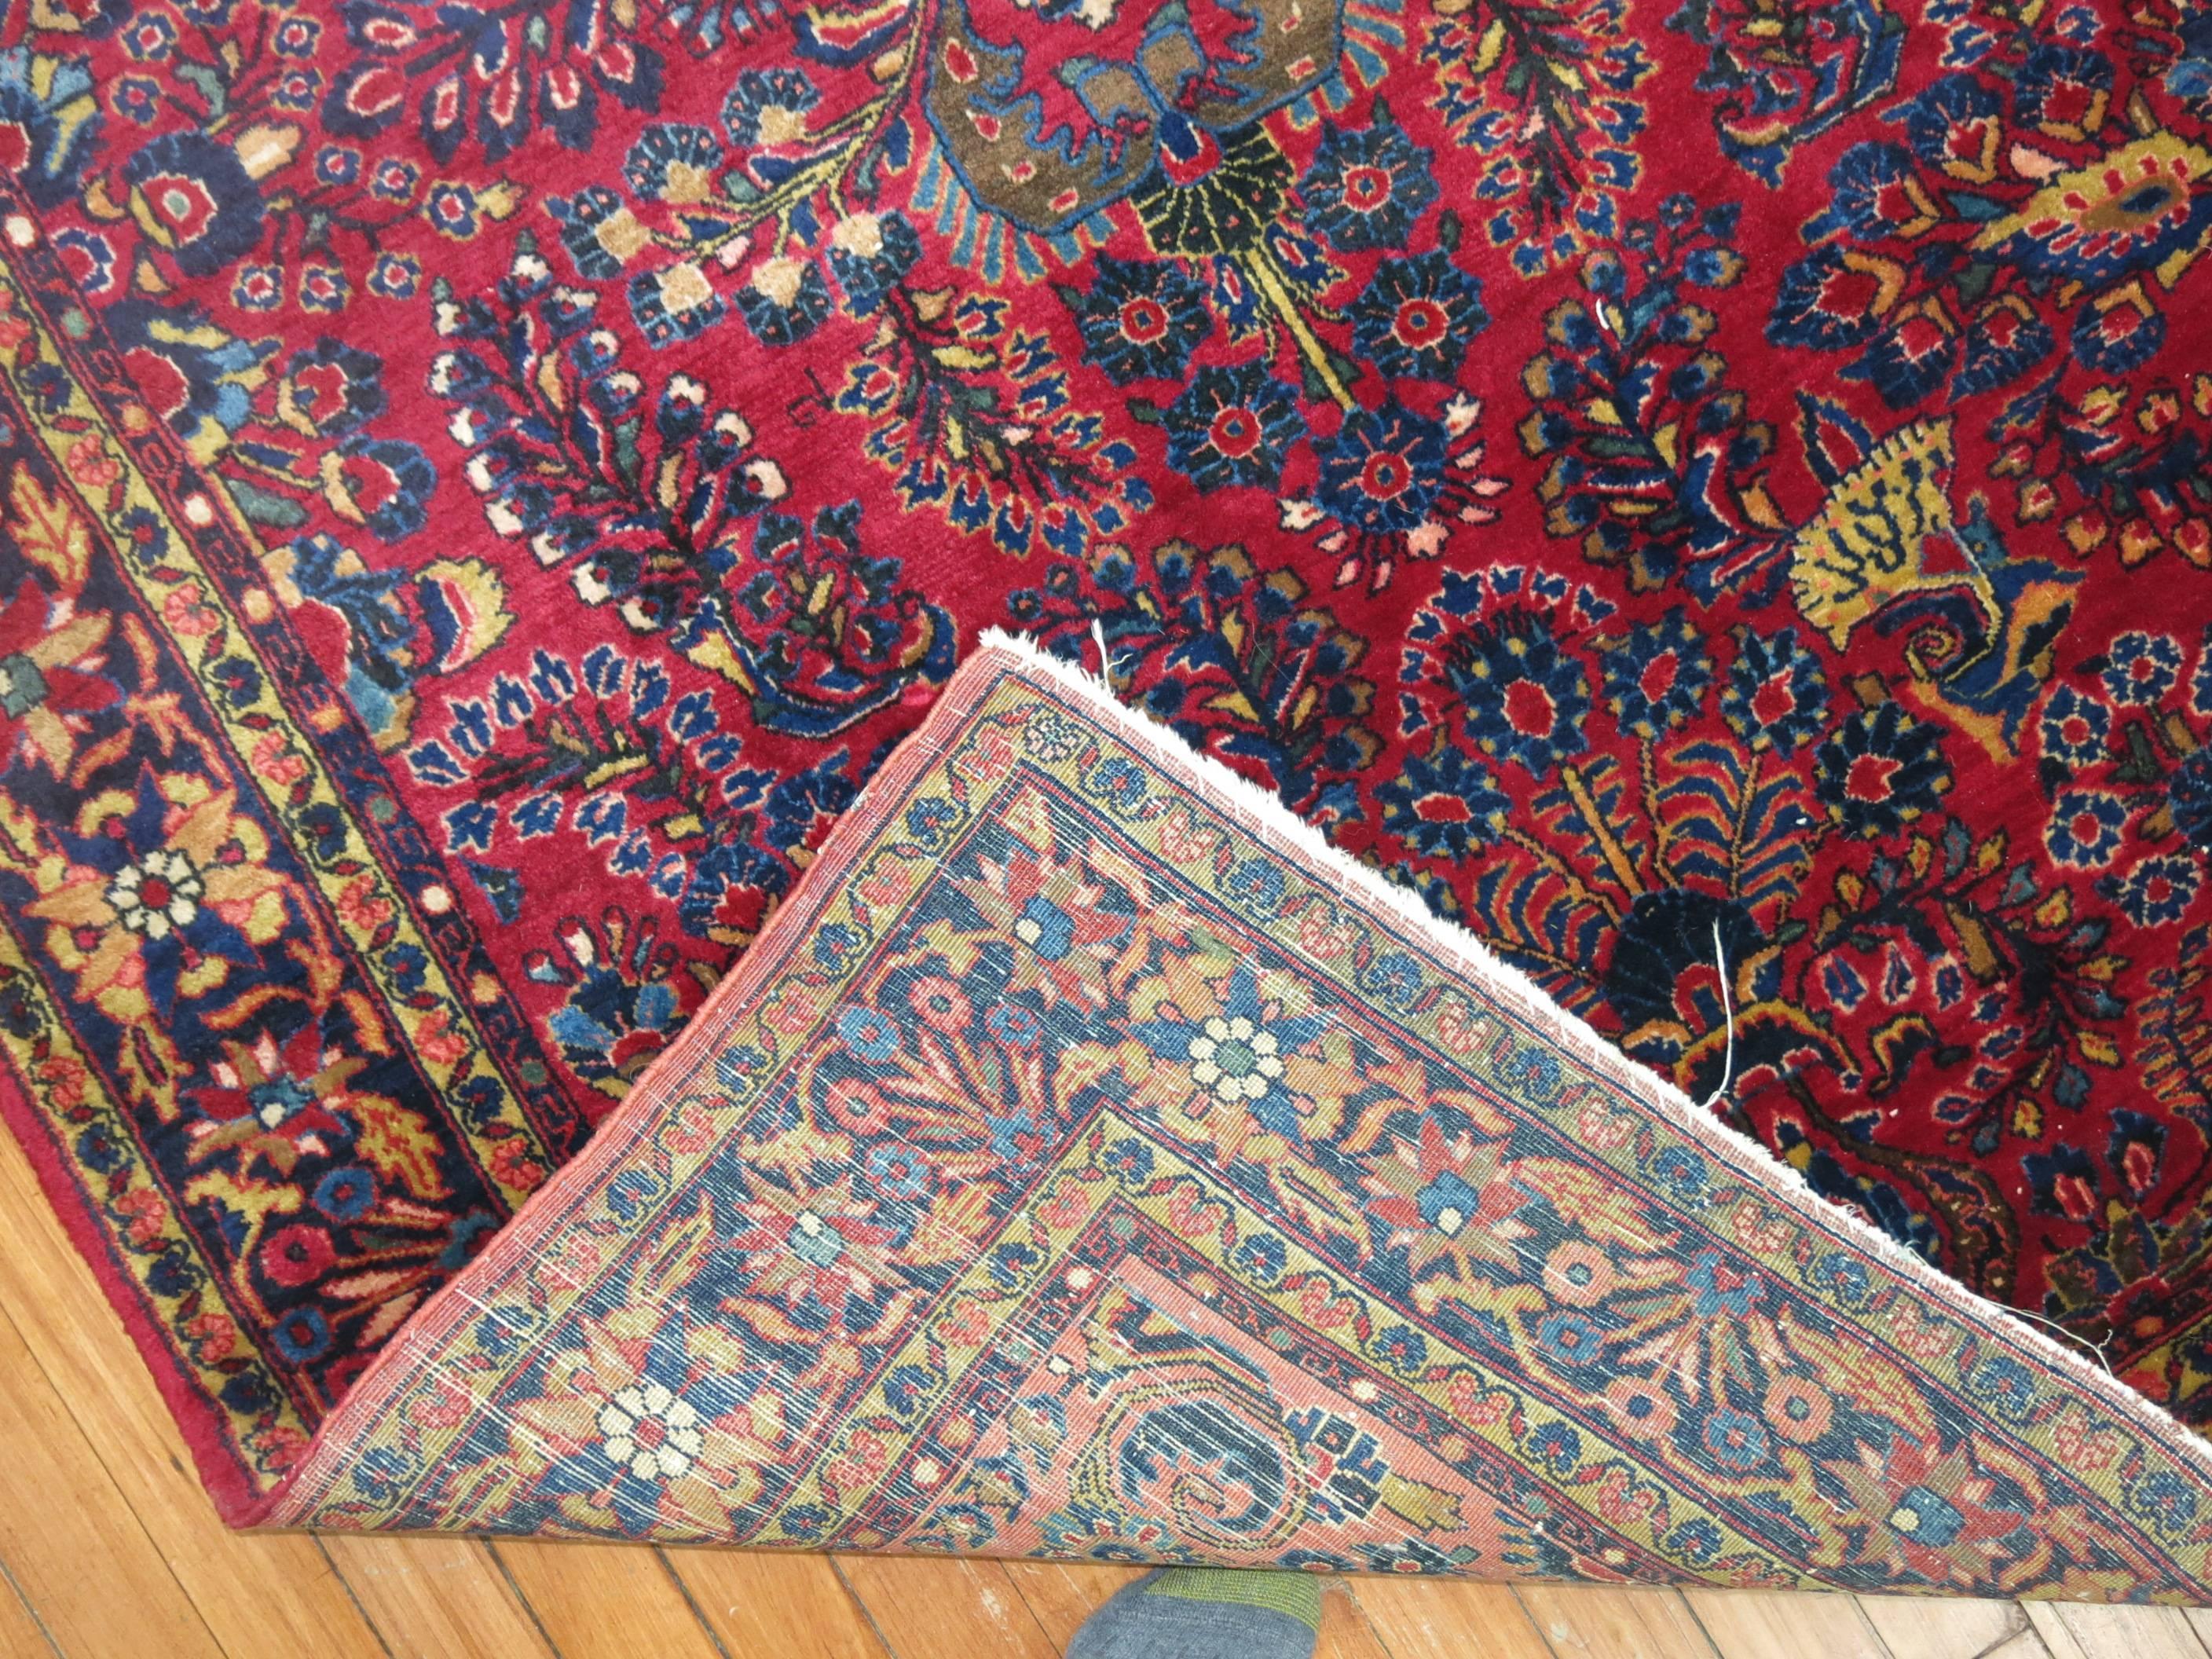 An early 20th century antique Persian Sarouk rug in deep reds and blues.

Sarouk rugs have been produced for much of the 20th century. The early successes of the Sarouk rug are largely owed to the American market. From the 1910s-1950s, the